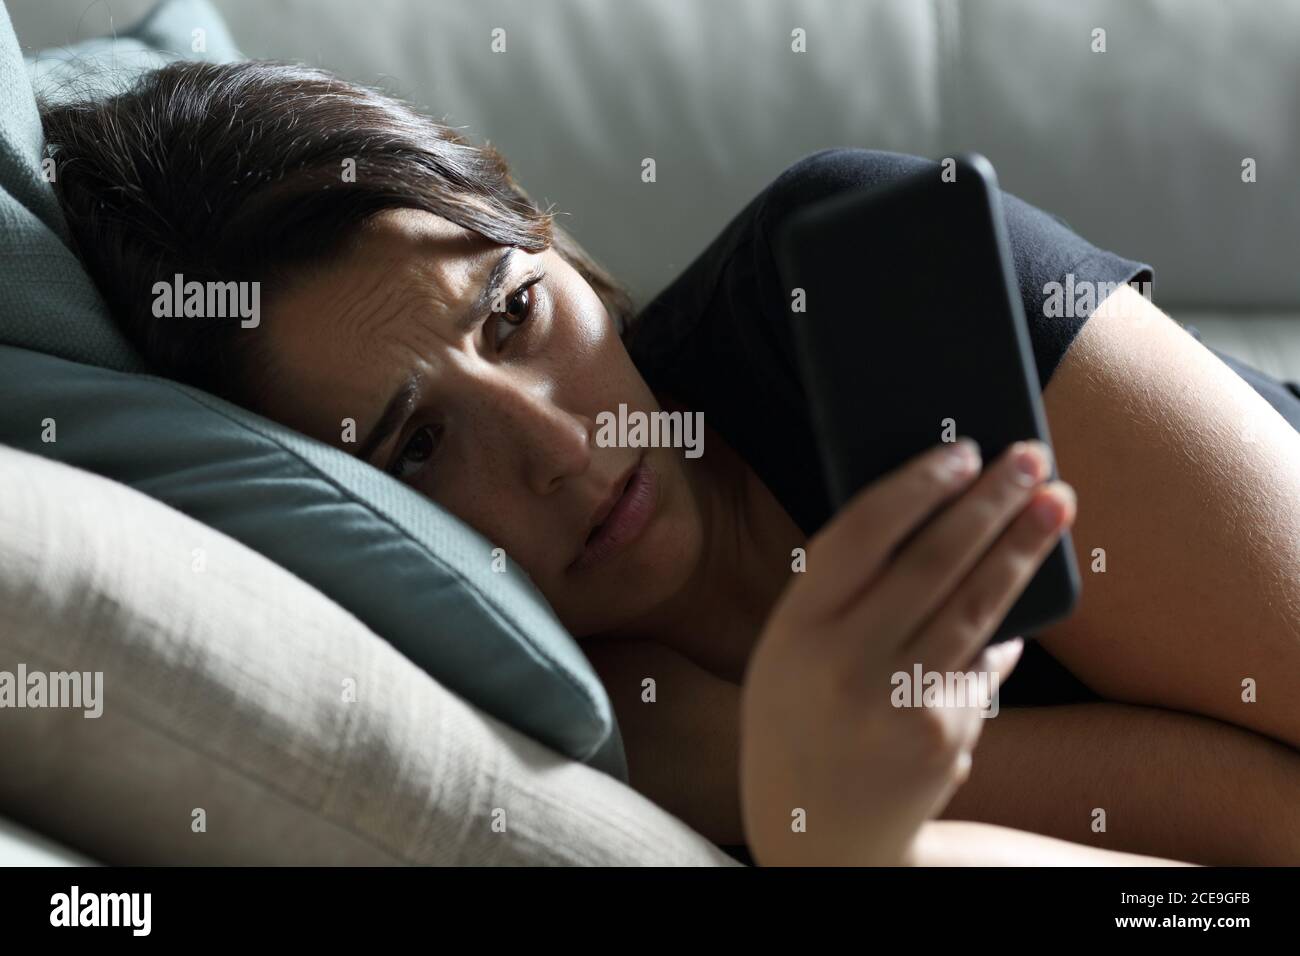 Sad woman checking phone in the dark lying on a sofa in the living room at home Stock Photo